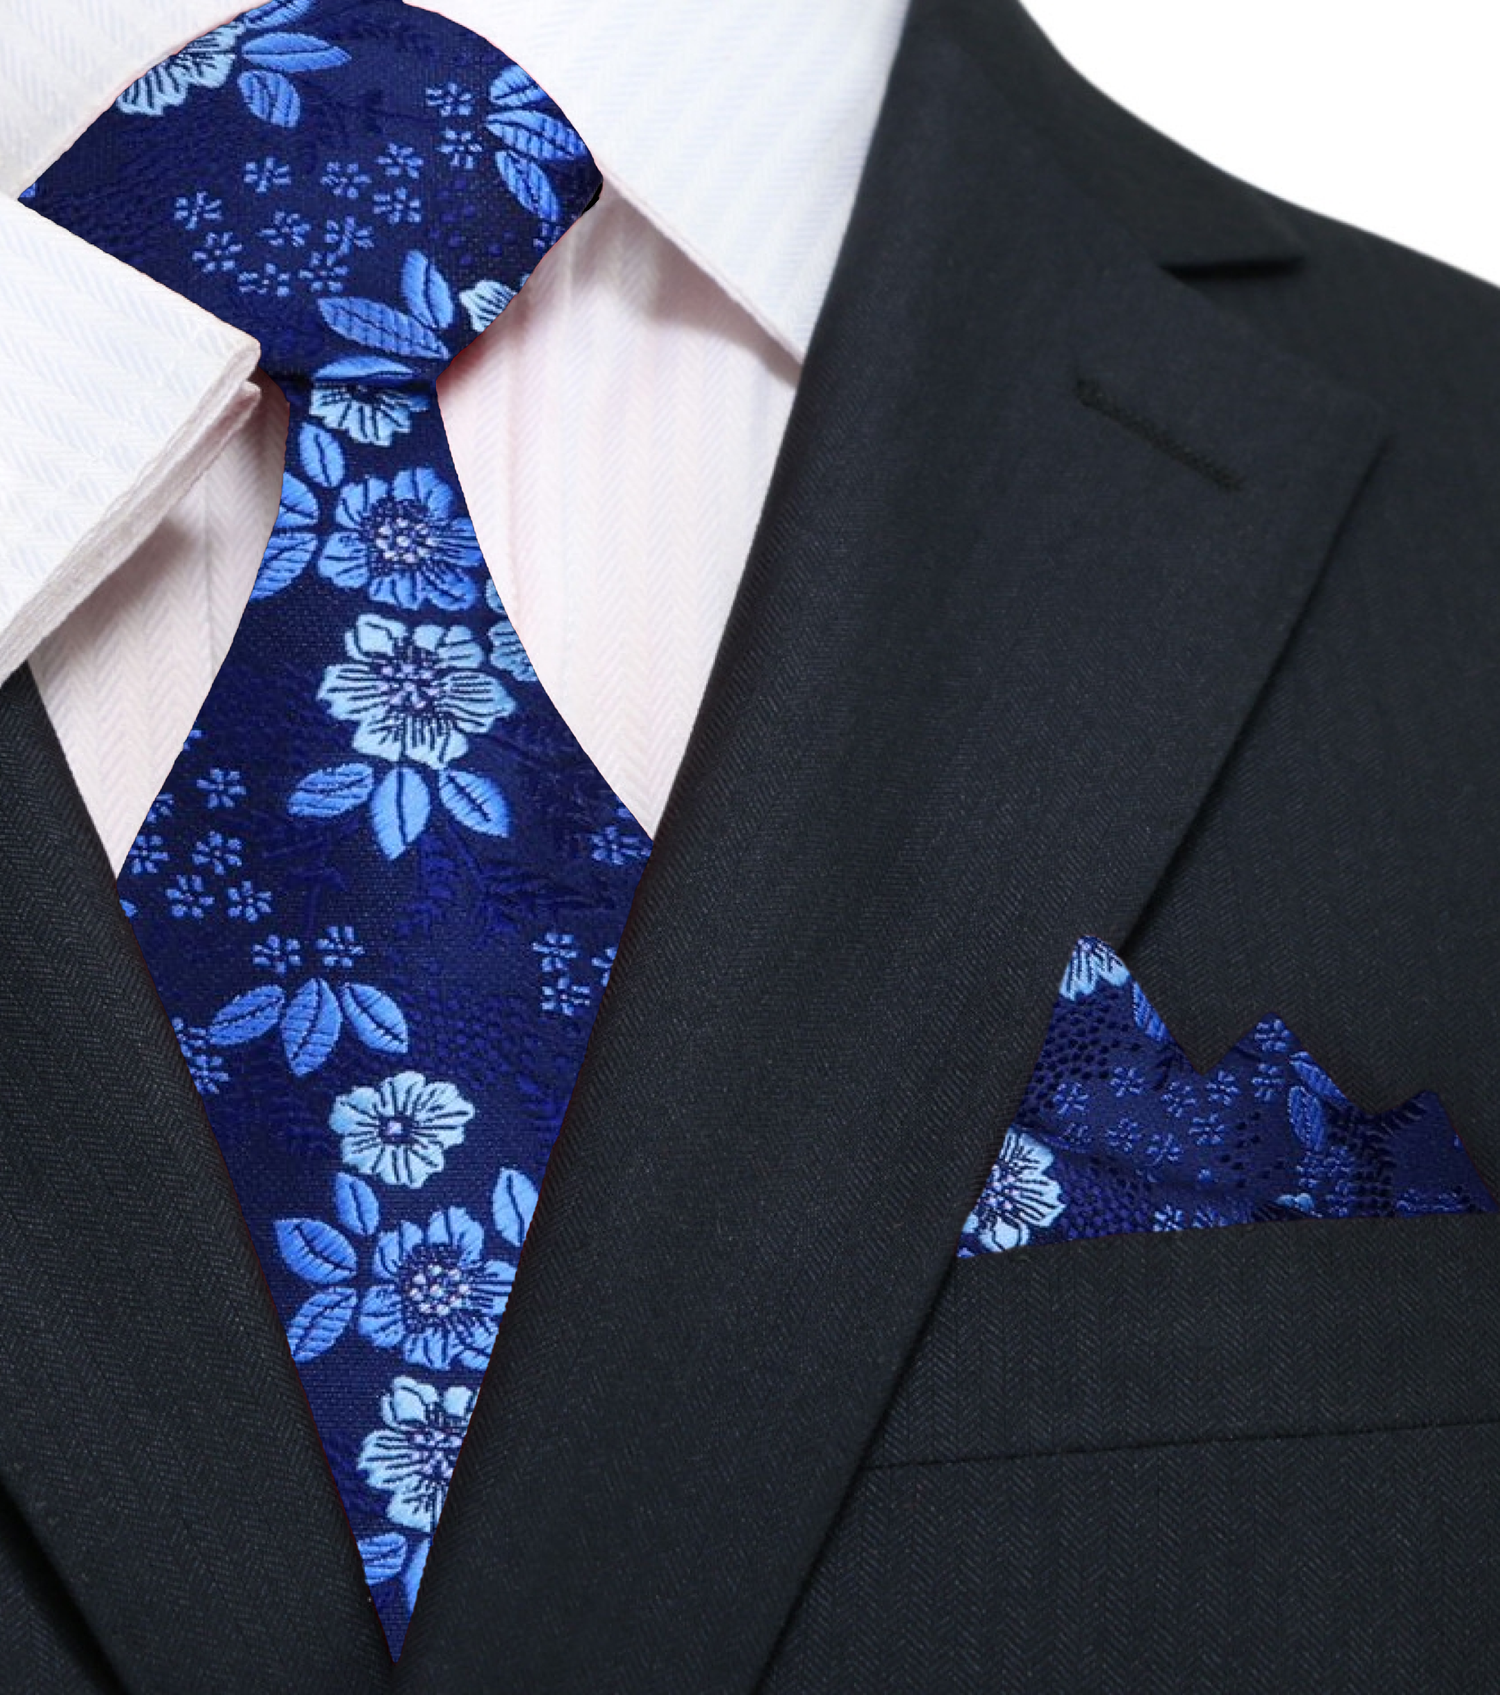 Main View: Shades of Blue Floral Tie and Pocket Square||Blue